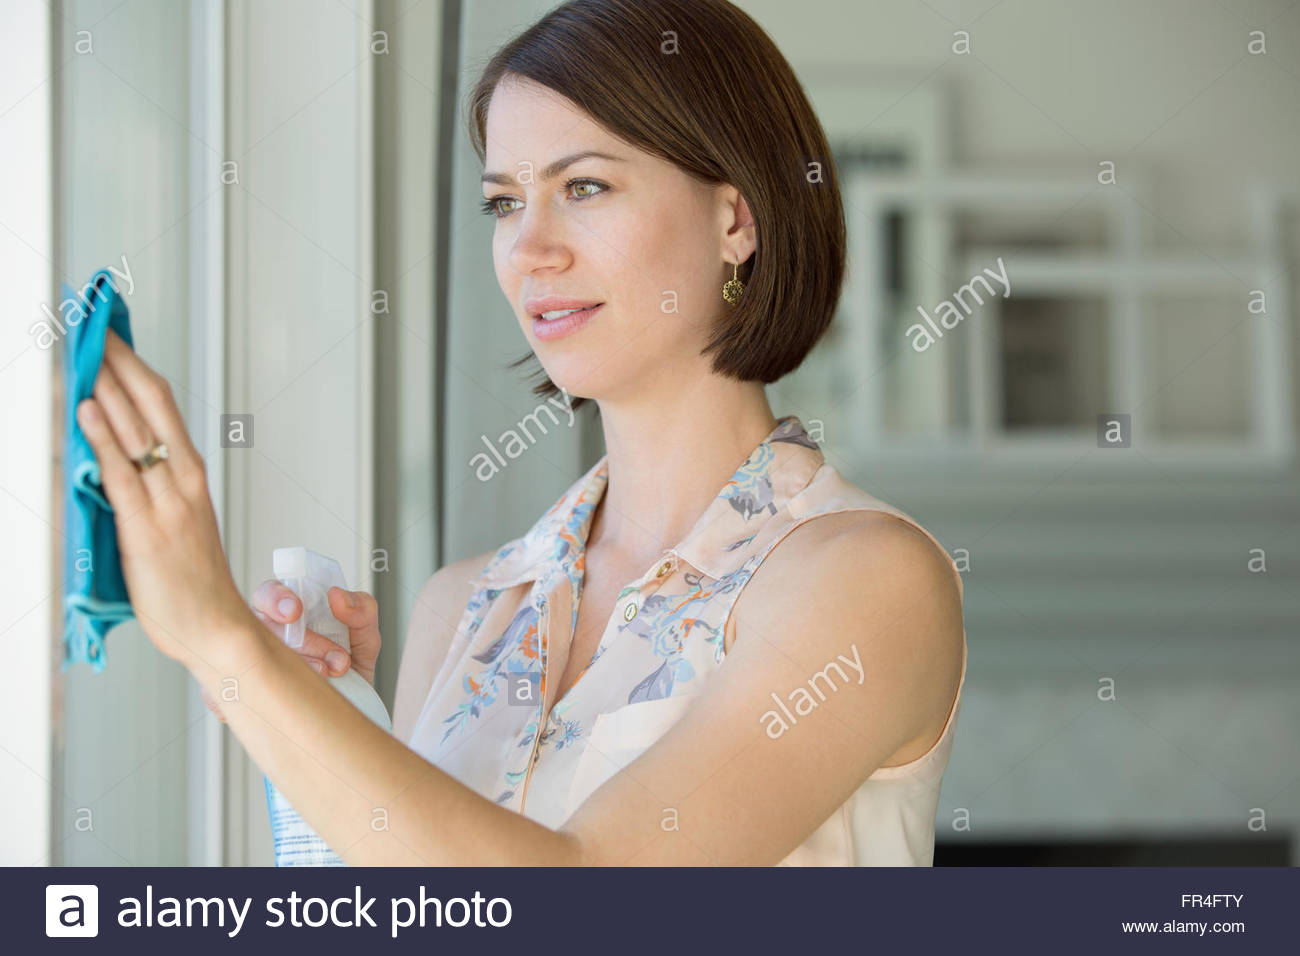 Woman using spray cleaner on white walls. Stock Photo